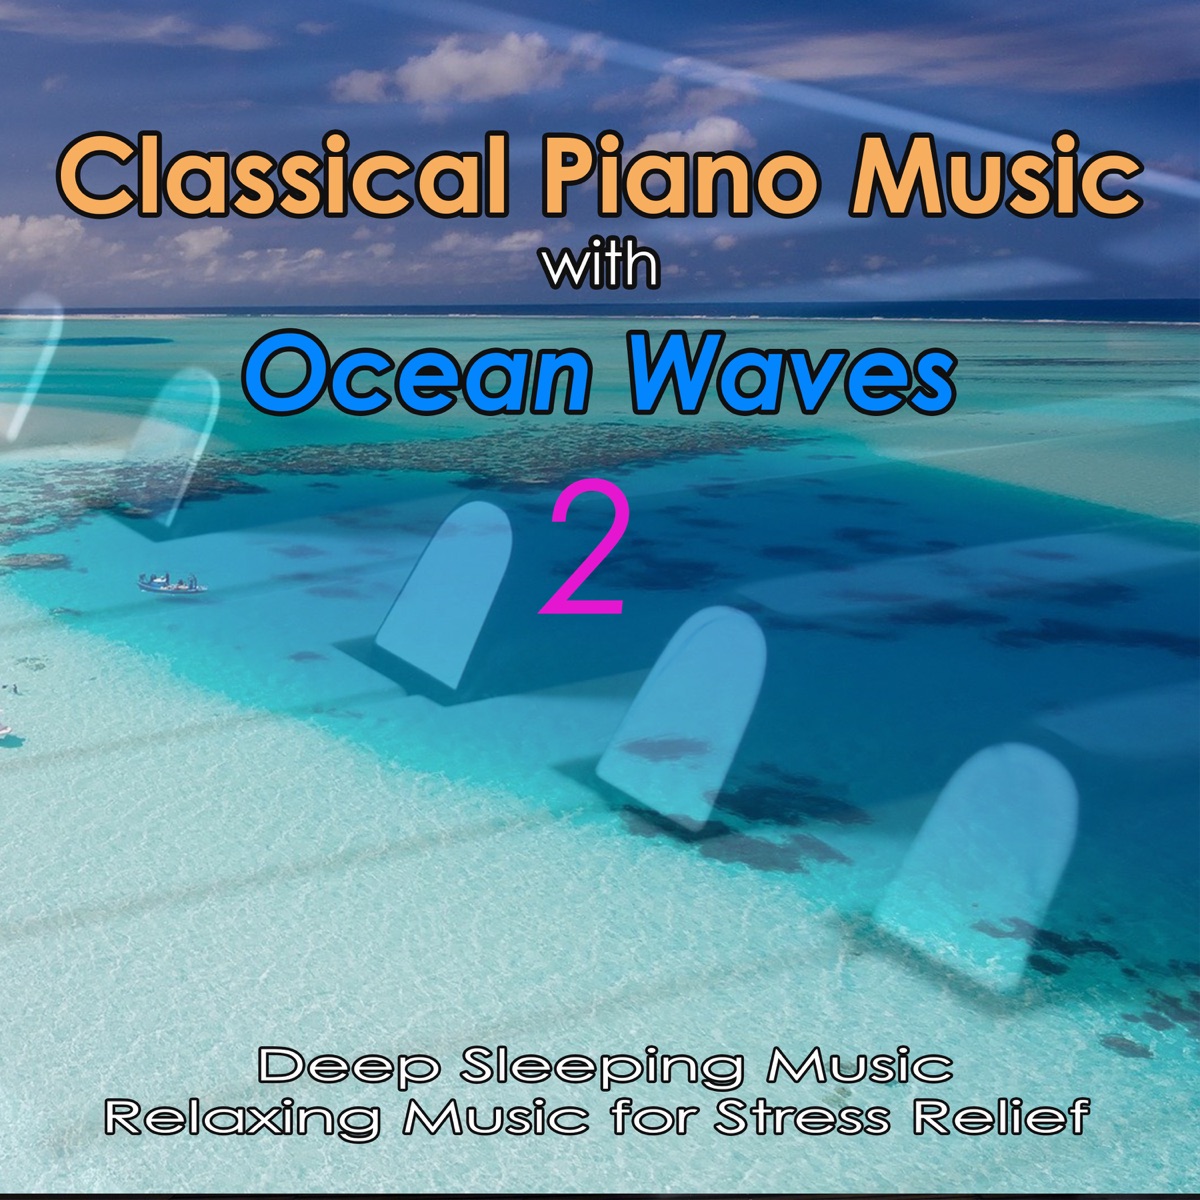 Classical Piano Music with Ocean Waves 2: Deep Sleeping Music, Relaxing  Music for Stress Relief - Album by Piano Music DEA Channel, Classical Music  DEA Channel & Relaxing Classical Music Academy - Apple Music